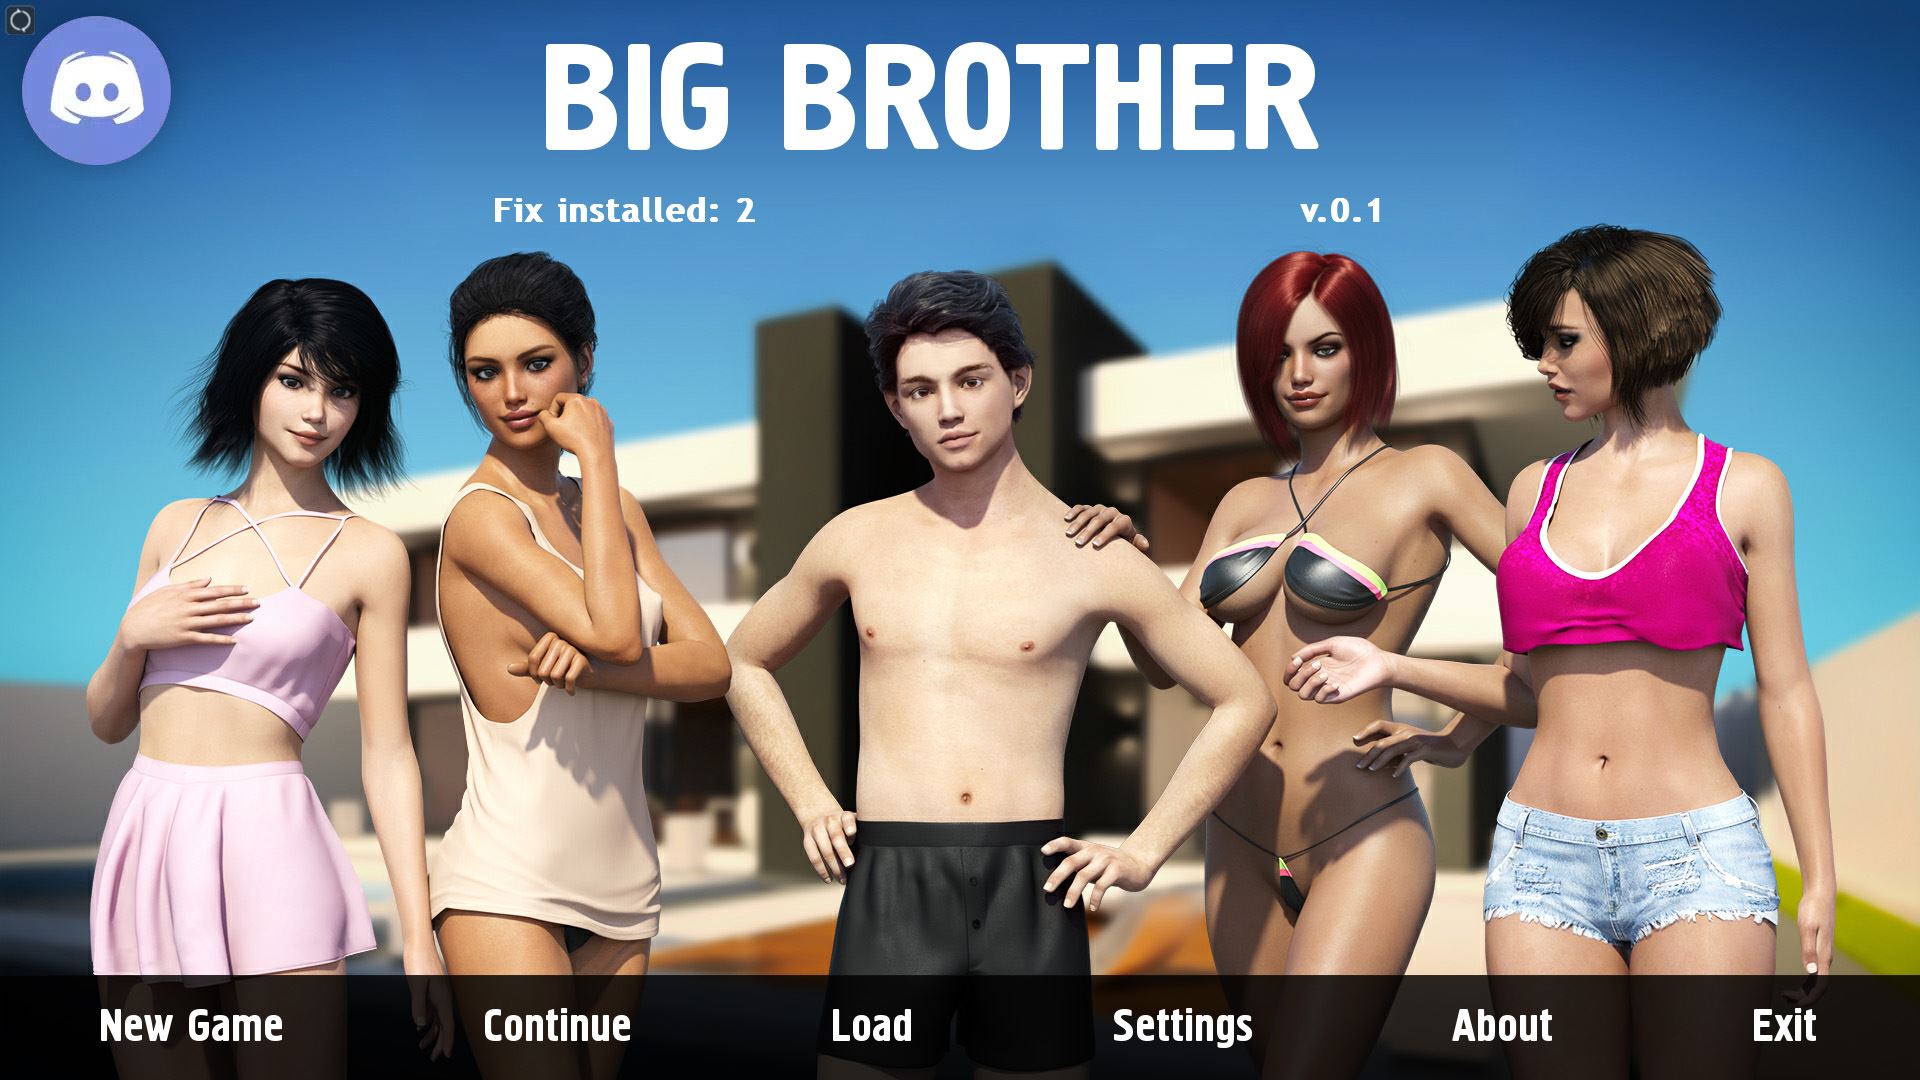 1920px x 1080px - Big Brother: Ren'Py Remake Story Ren'Py Porn Sex Game v.1.02 - Fix 5  Download for Windows, MacOS, Linux, Android